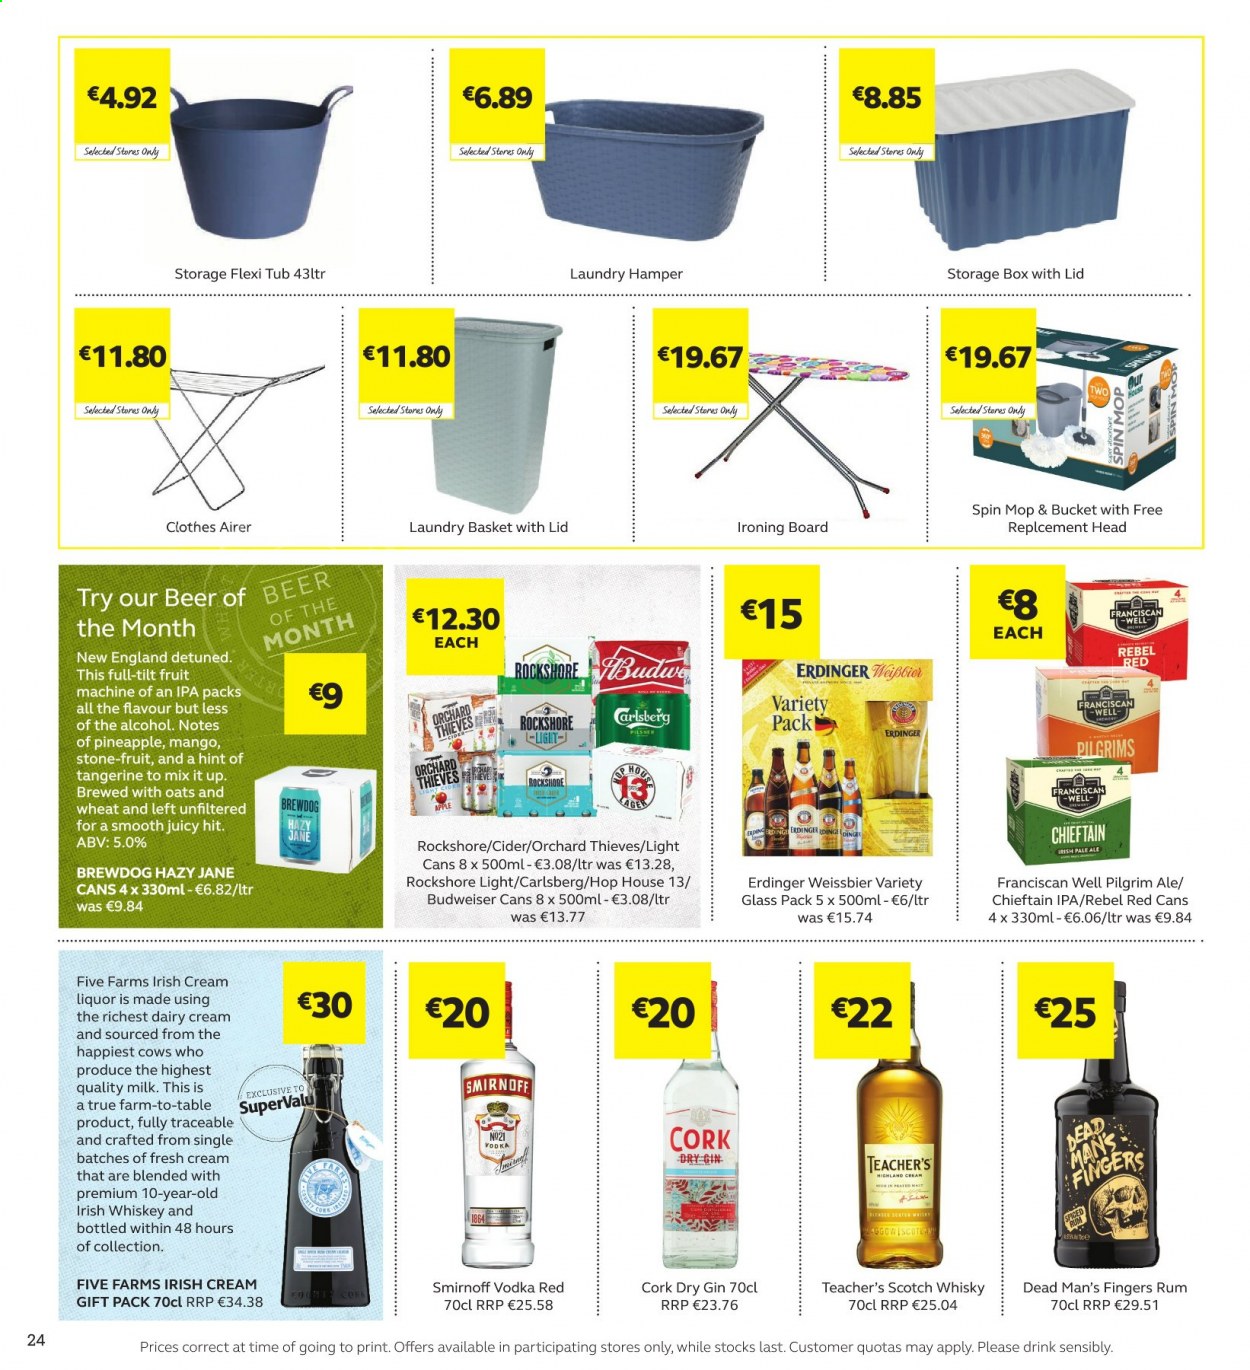 thumbnail - SuperValu offer  - 11.02.2021 - 24.02.2021 - Sales products - mango, hamper, alcohol, apple cider, gin, rum, Smirnoff, vodka, whiskey, irish cream, liquor, beer, Budweiser, Carlsberg, IPA, basket, ironing board, airer, spin mop, mop, box with lids, storage box. Page 24.